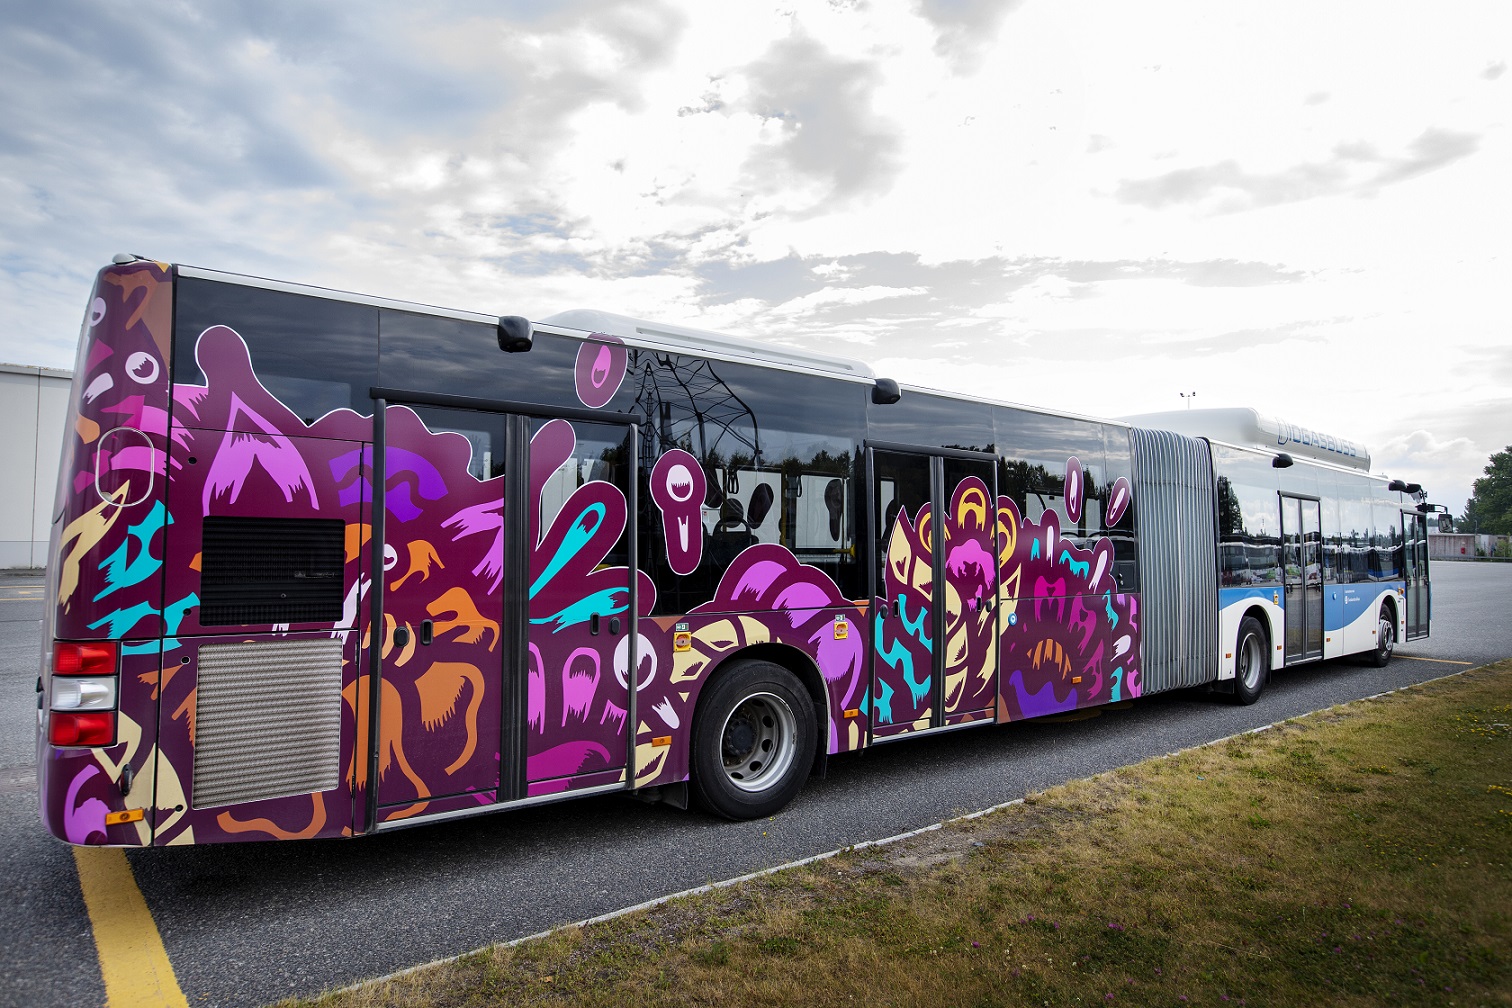 One of the city's city buses, an articulated bus has one half decorated with a print of a floral pattern. The pattern comes in different forms and is mainly in the color purple but also outlines in the colors yellow, orange, blue and pink.